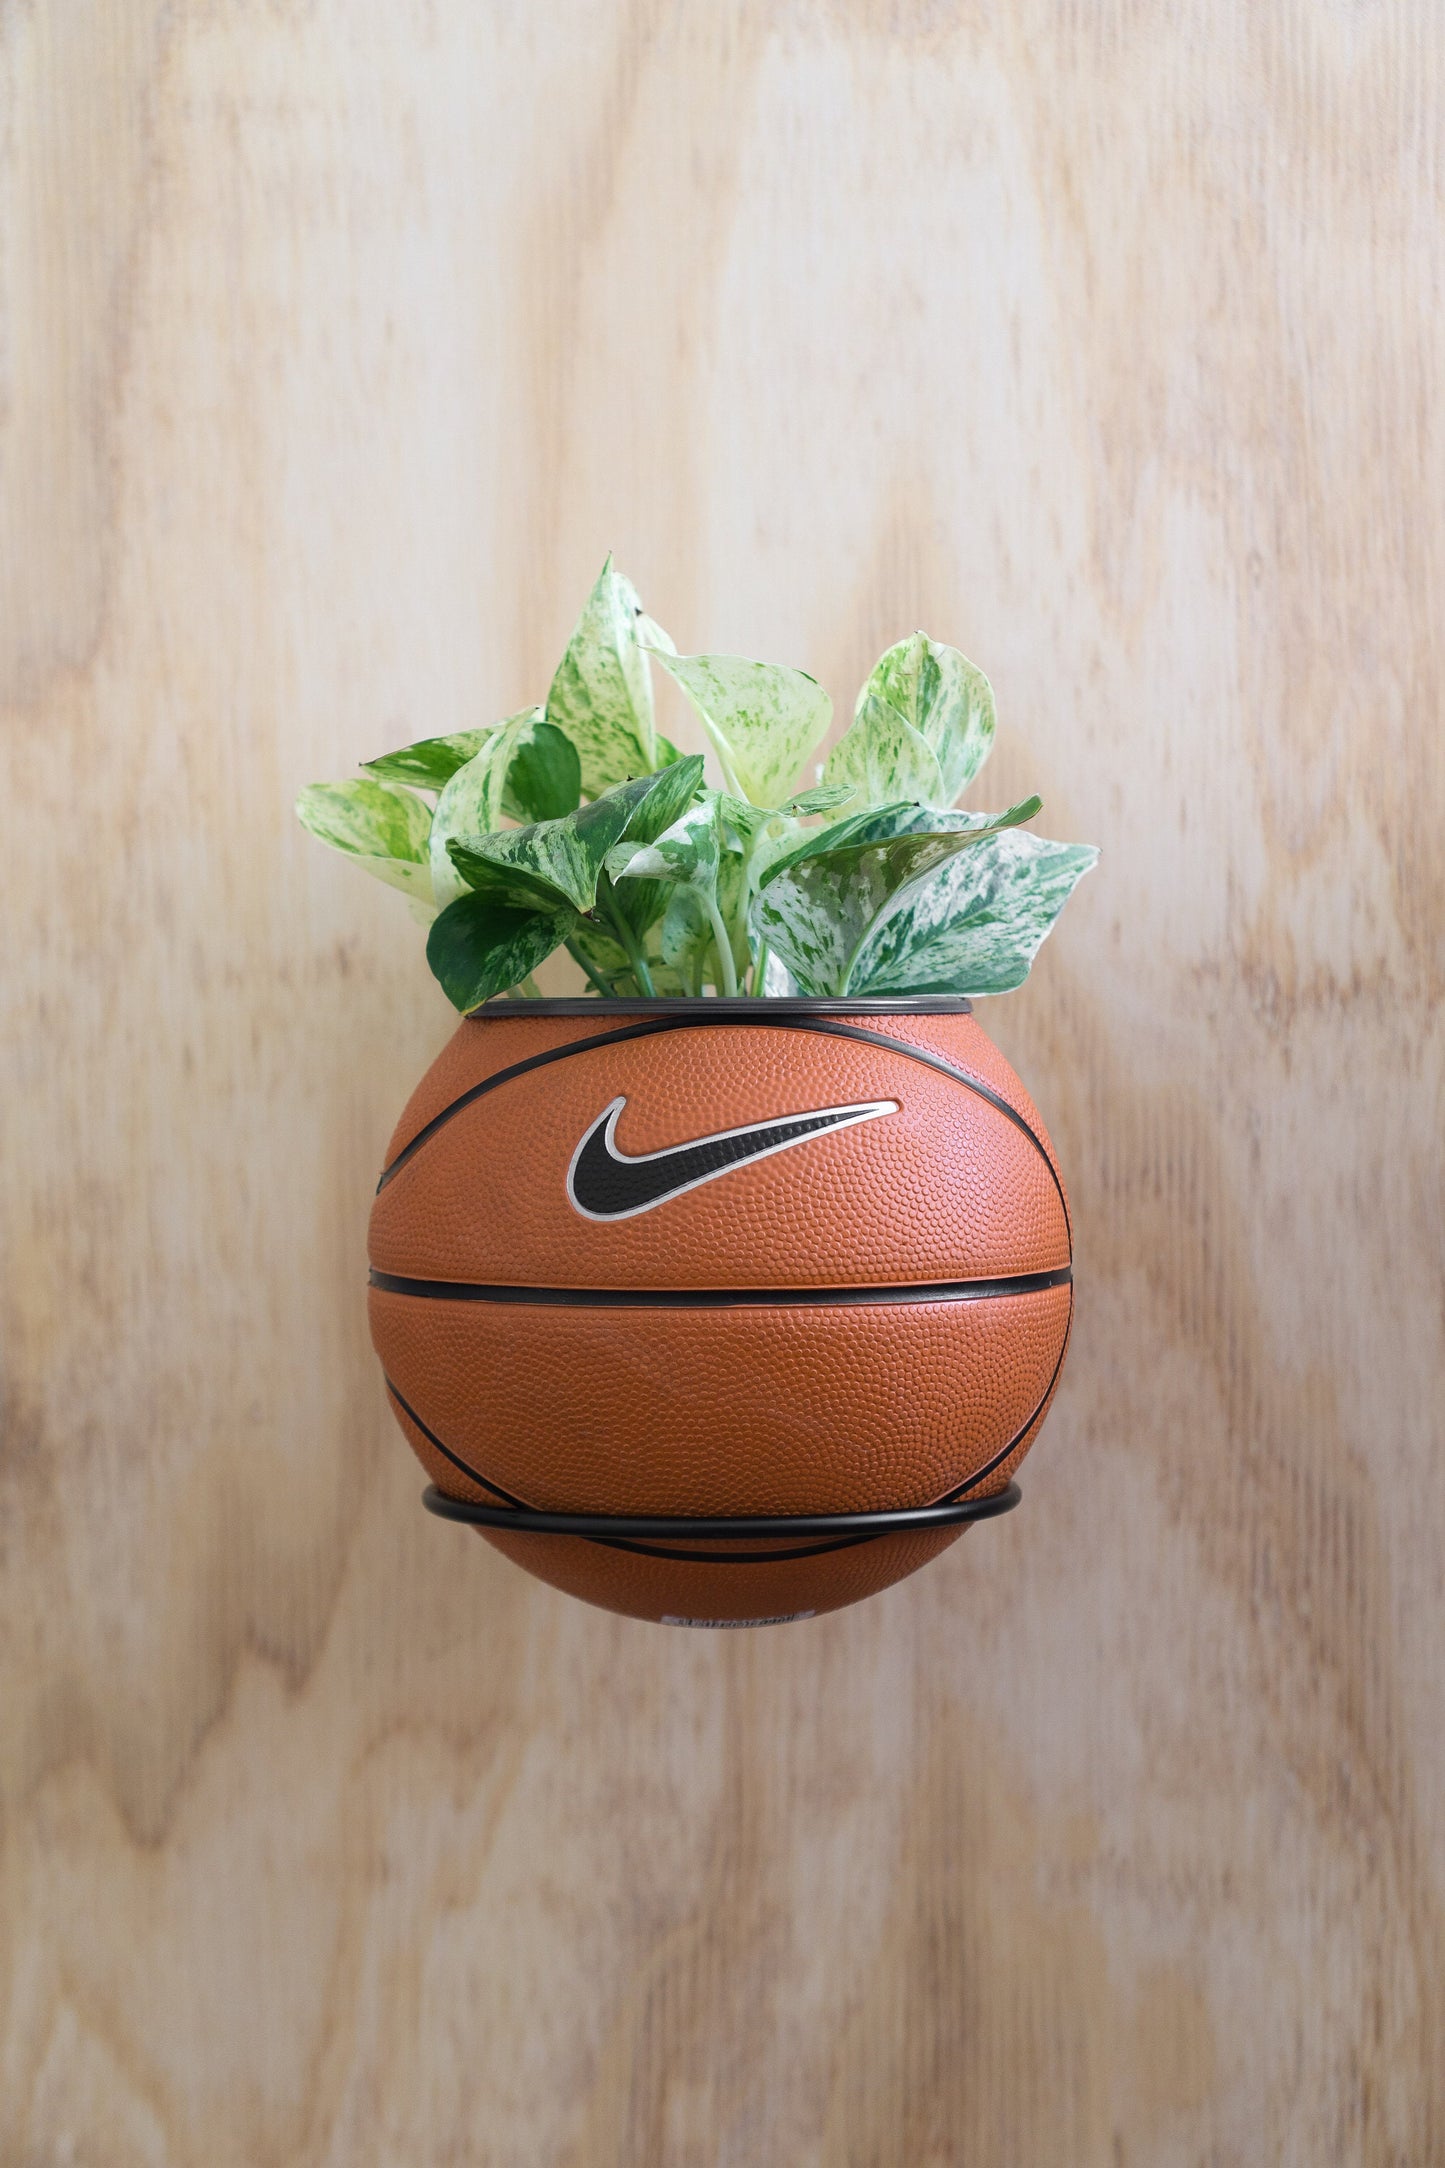 plntrs - Nike Royal Blue/Yellow Swoosh Mini Basketball Planter - new ball with stand